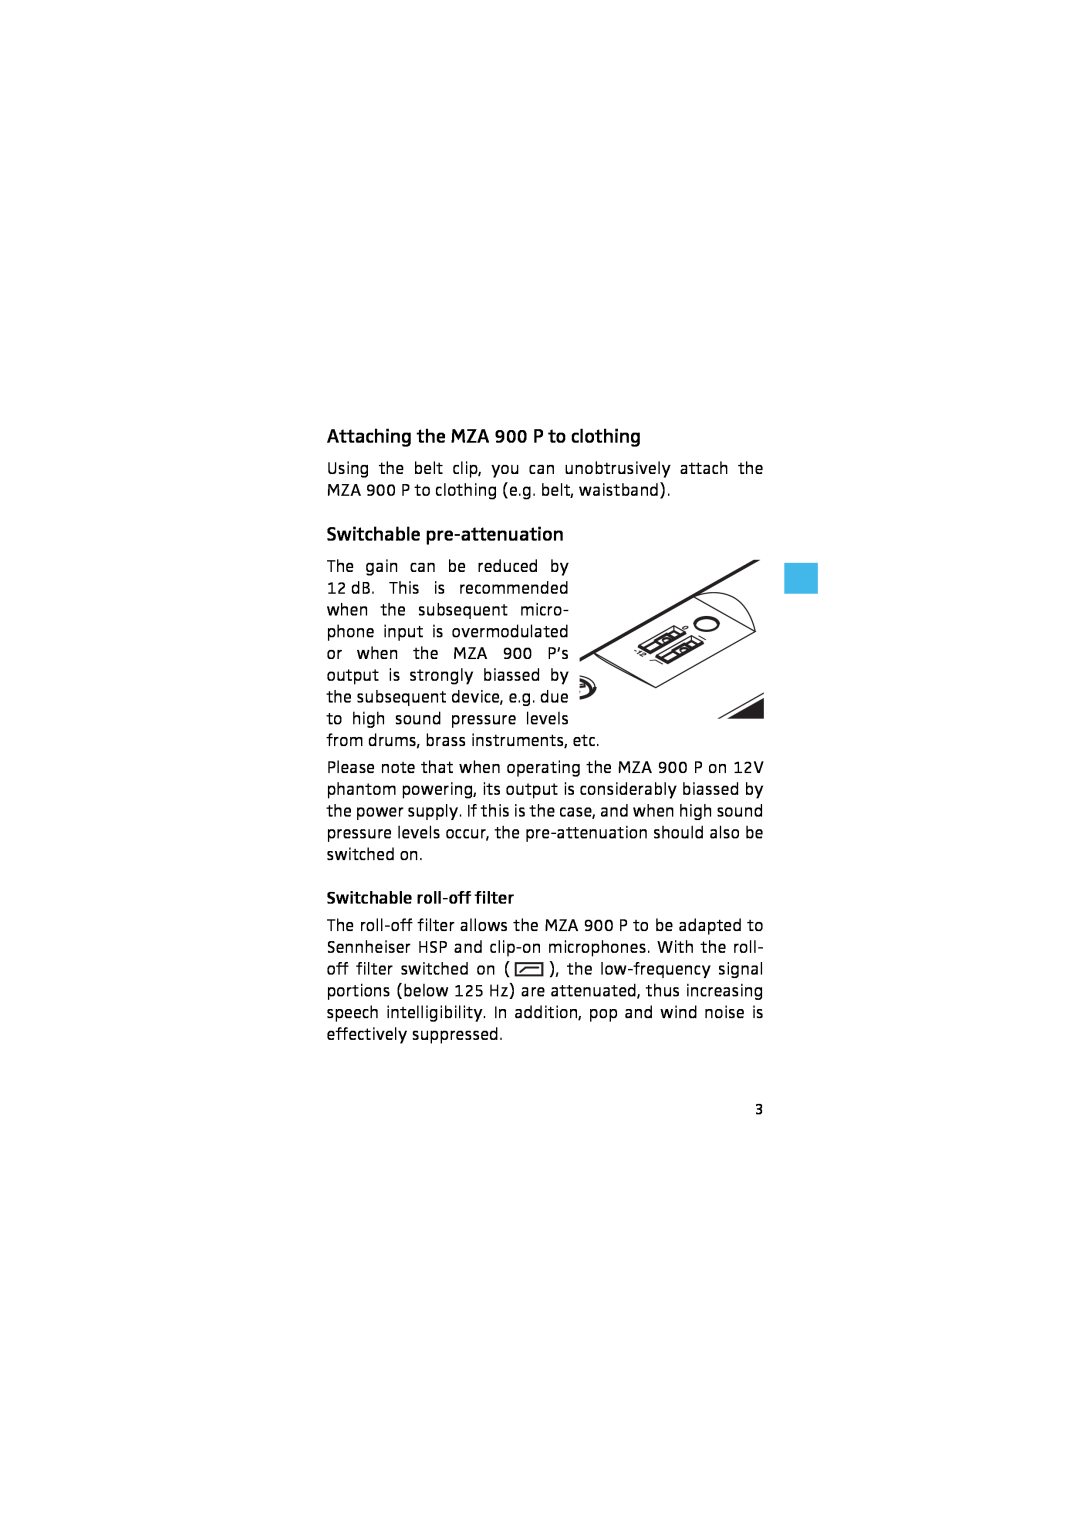 Sennheiser manual Attaching the MZA 900 P to clothing, Switchable pre-attenuation 